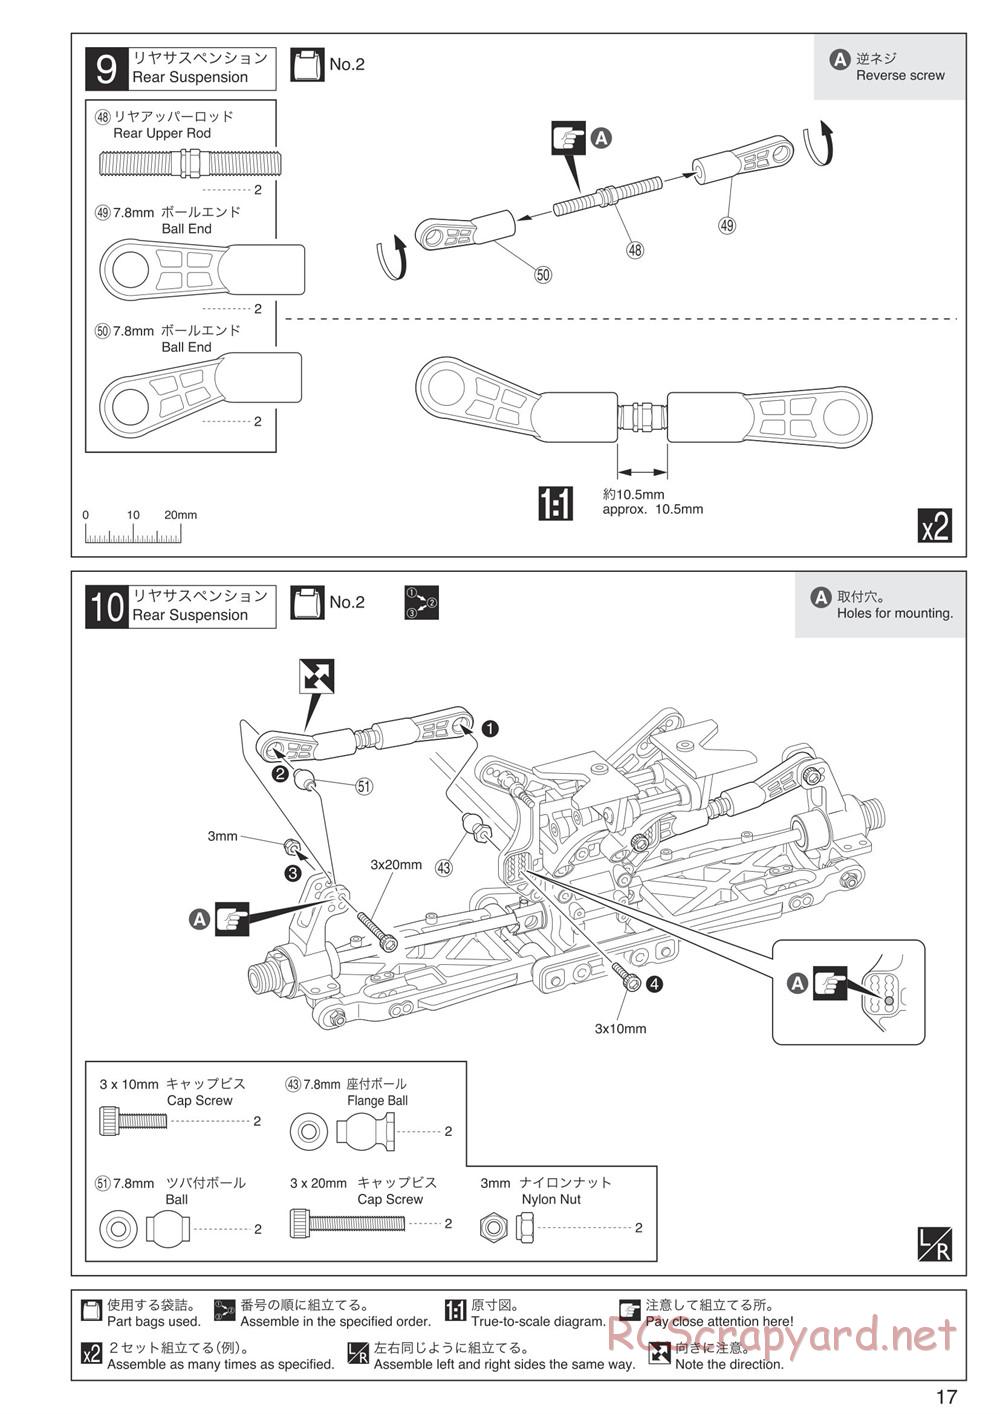 Kyosho - Inferno MP9 TKI4 10th Anniversary Special Edition - Manual - Page 17